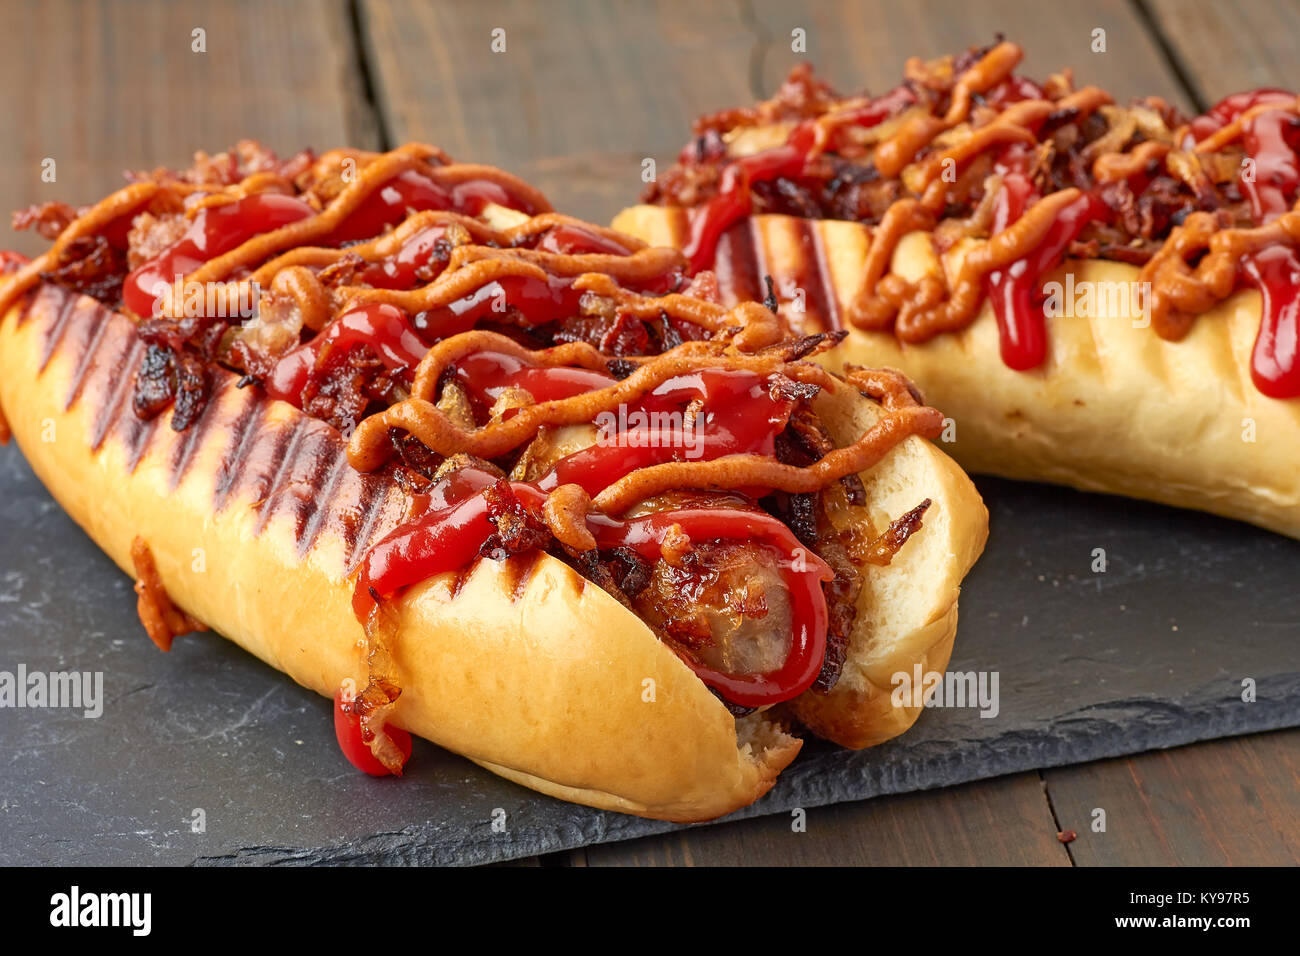 Two tasty hot dogs Stock Photo